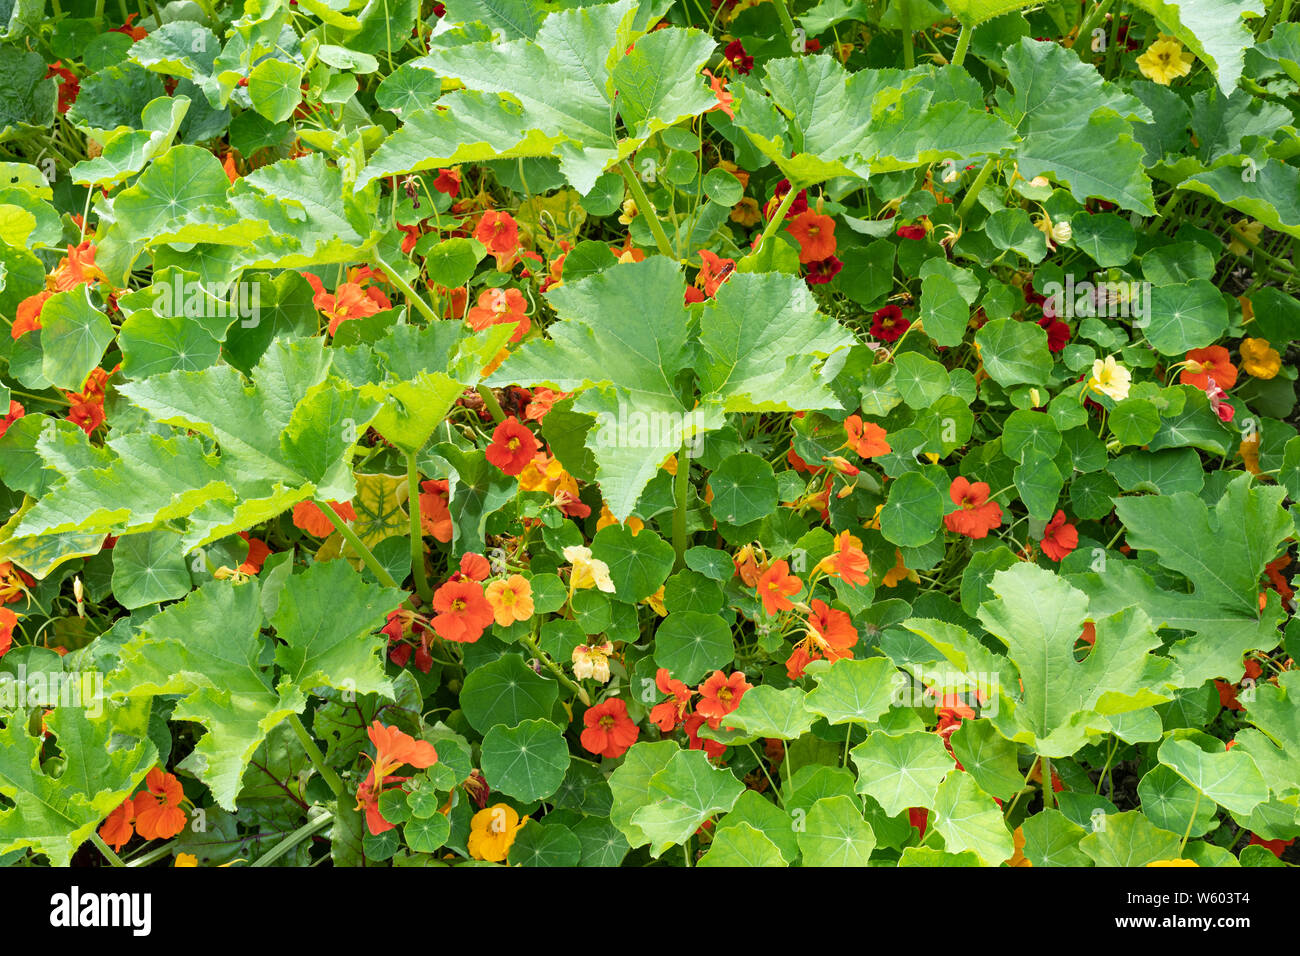 Dwarf nasturtiums (Tropaeolum minus) grown among squash plants to protect against aphids in a vegetable garden, UK, summer. Stock Photo